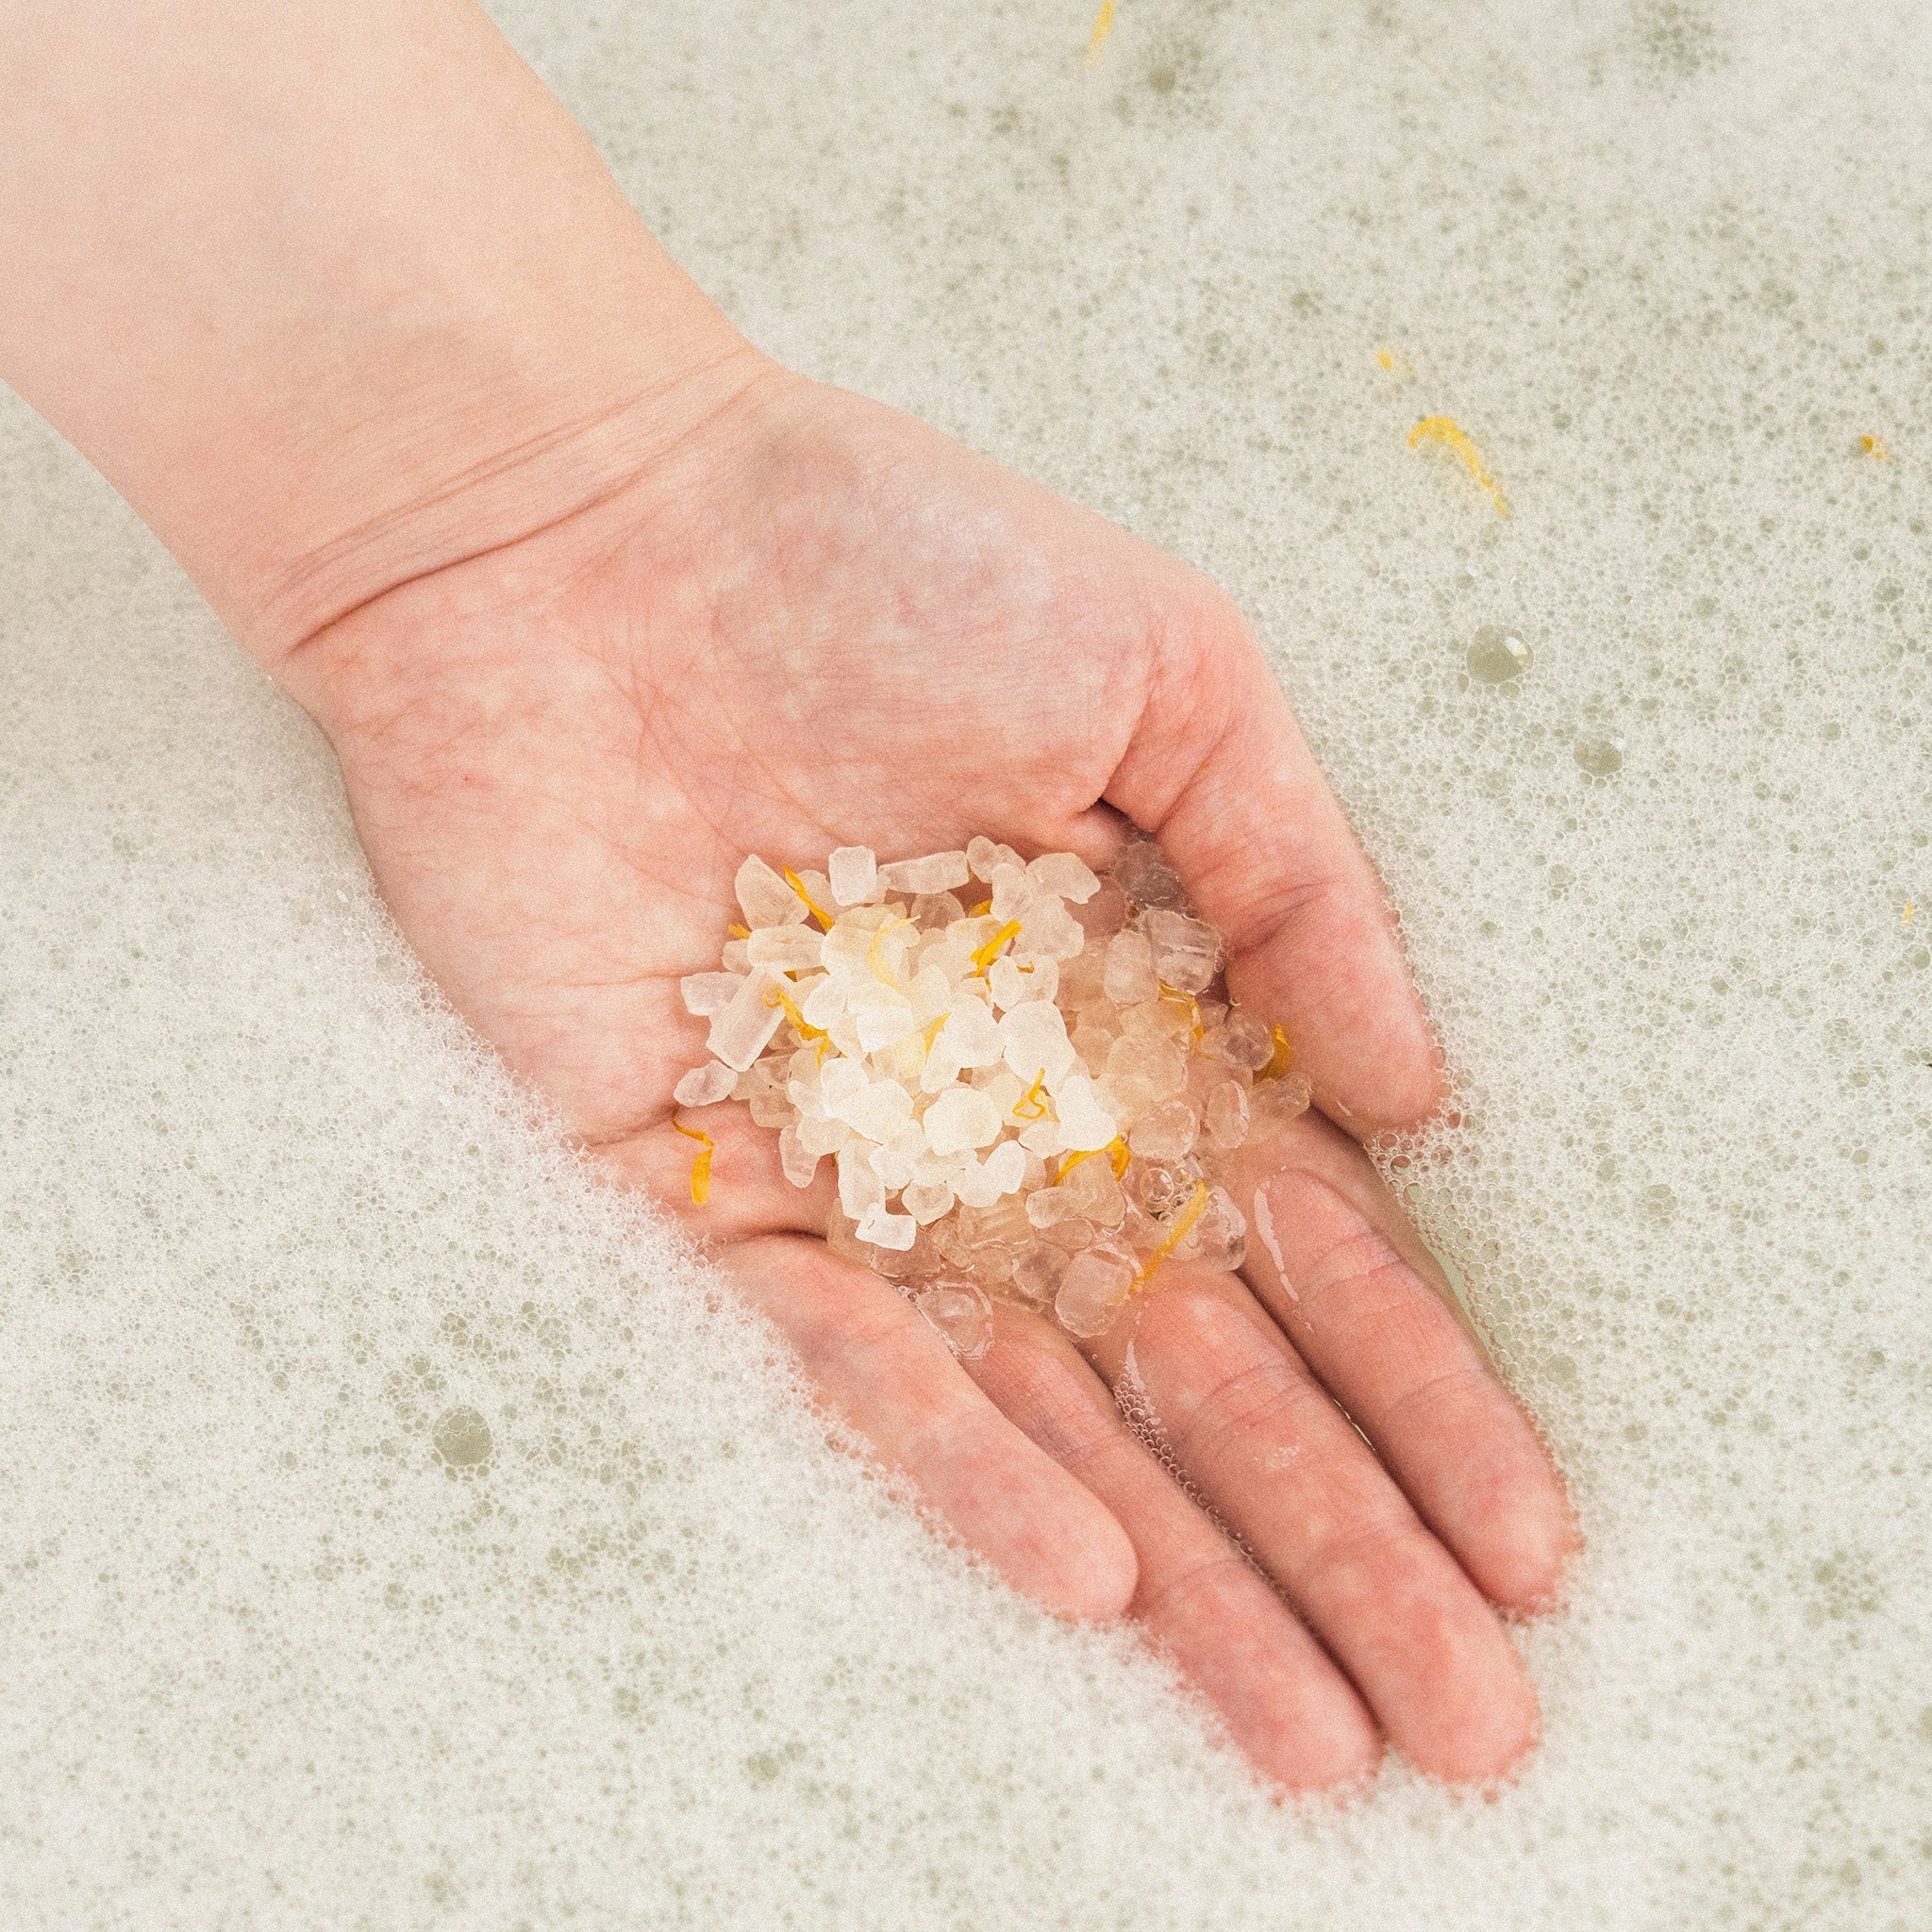 A hand holding transparent bath salt crystals with golden flakes, against a background of white, foamy water.